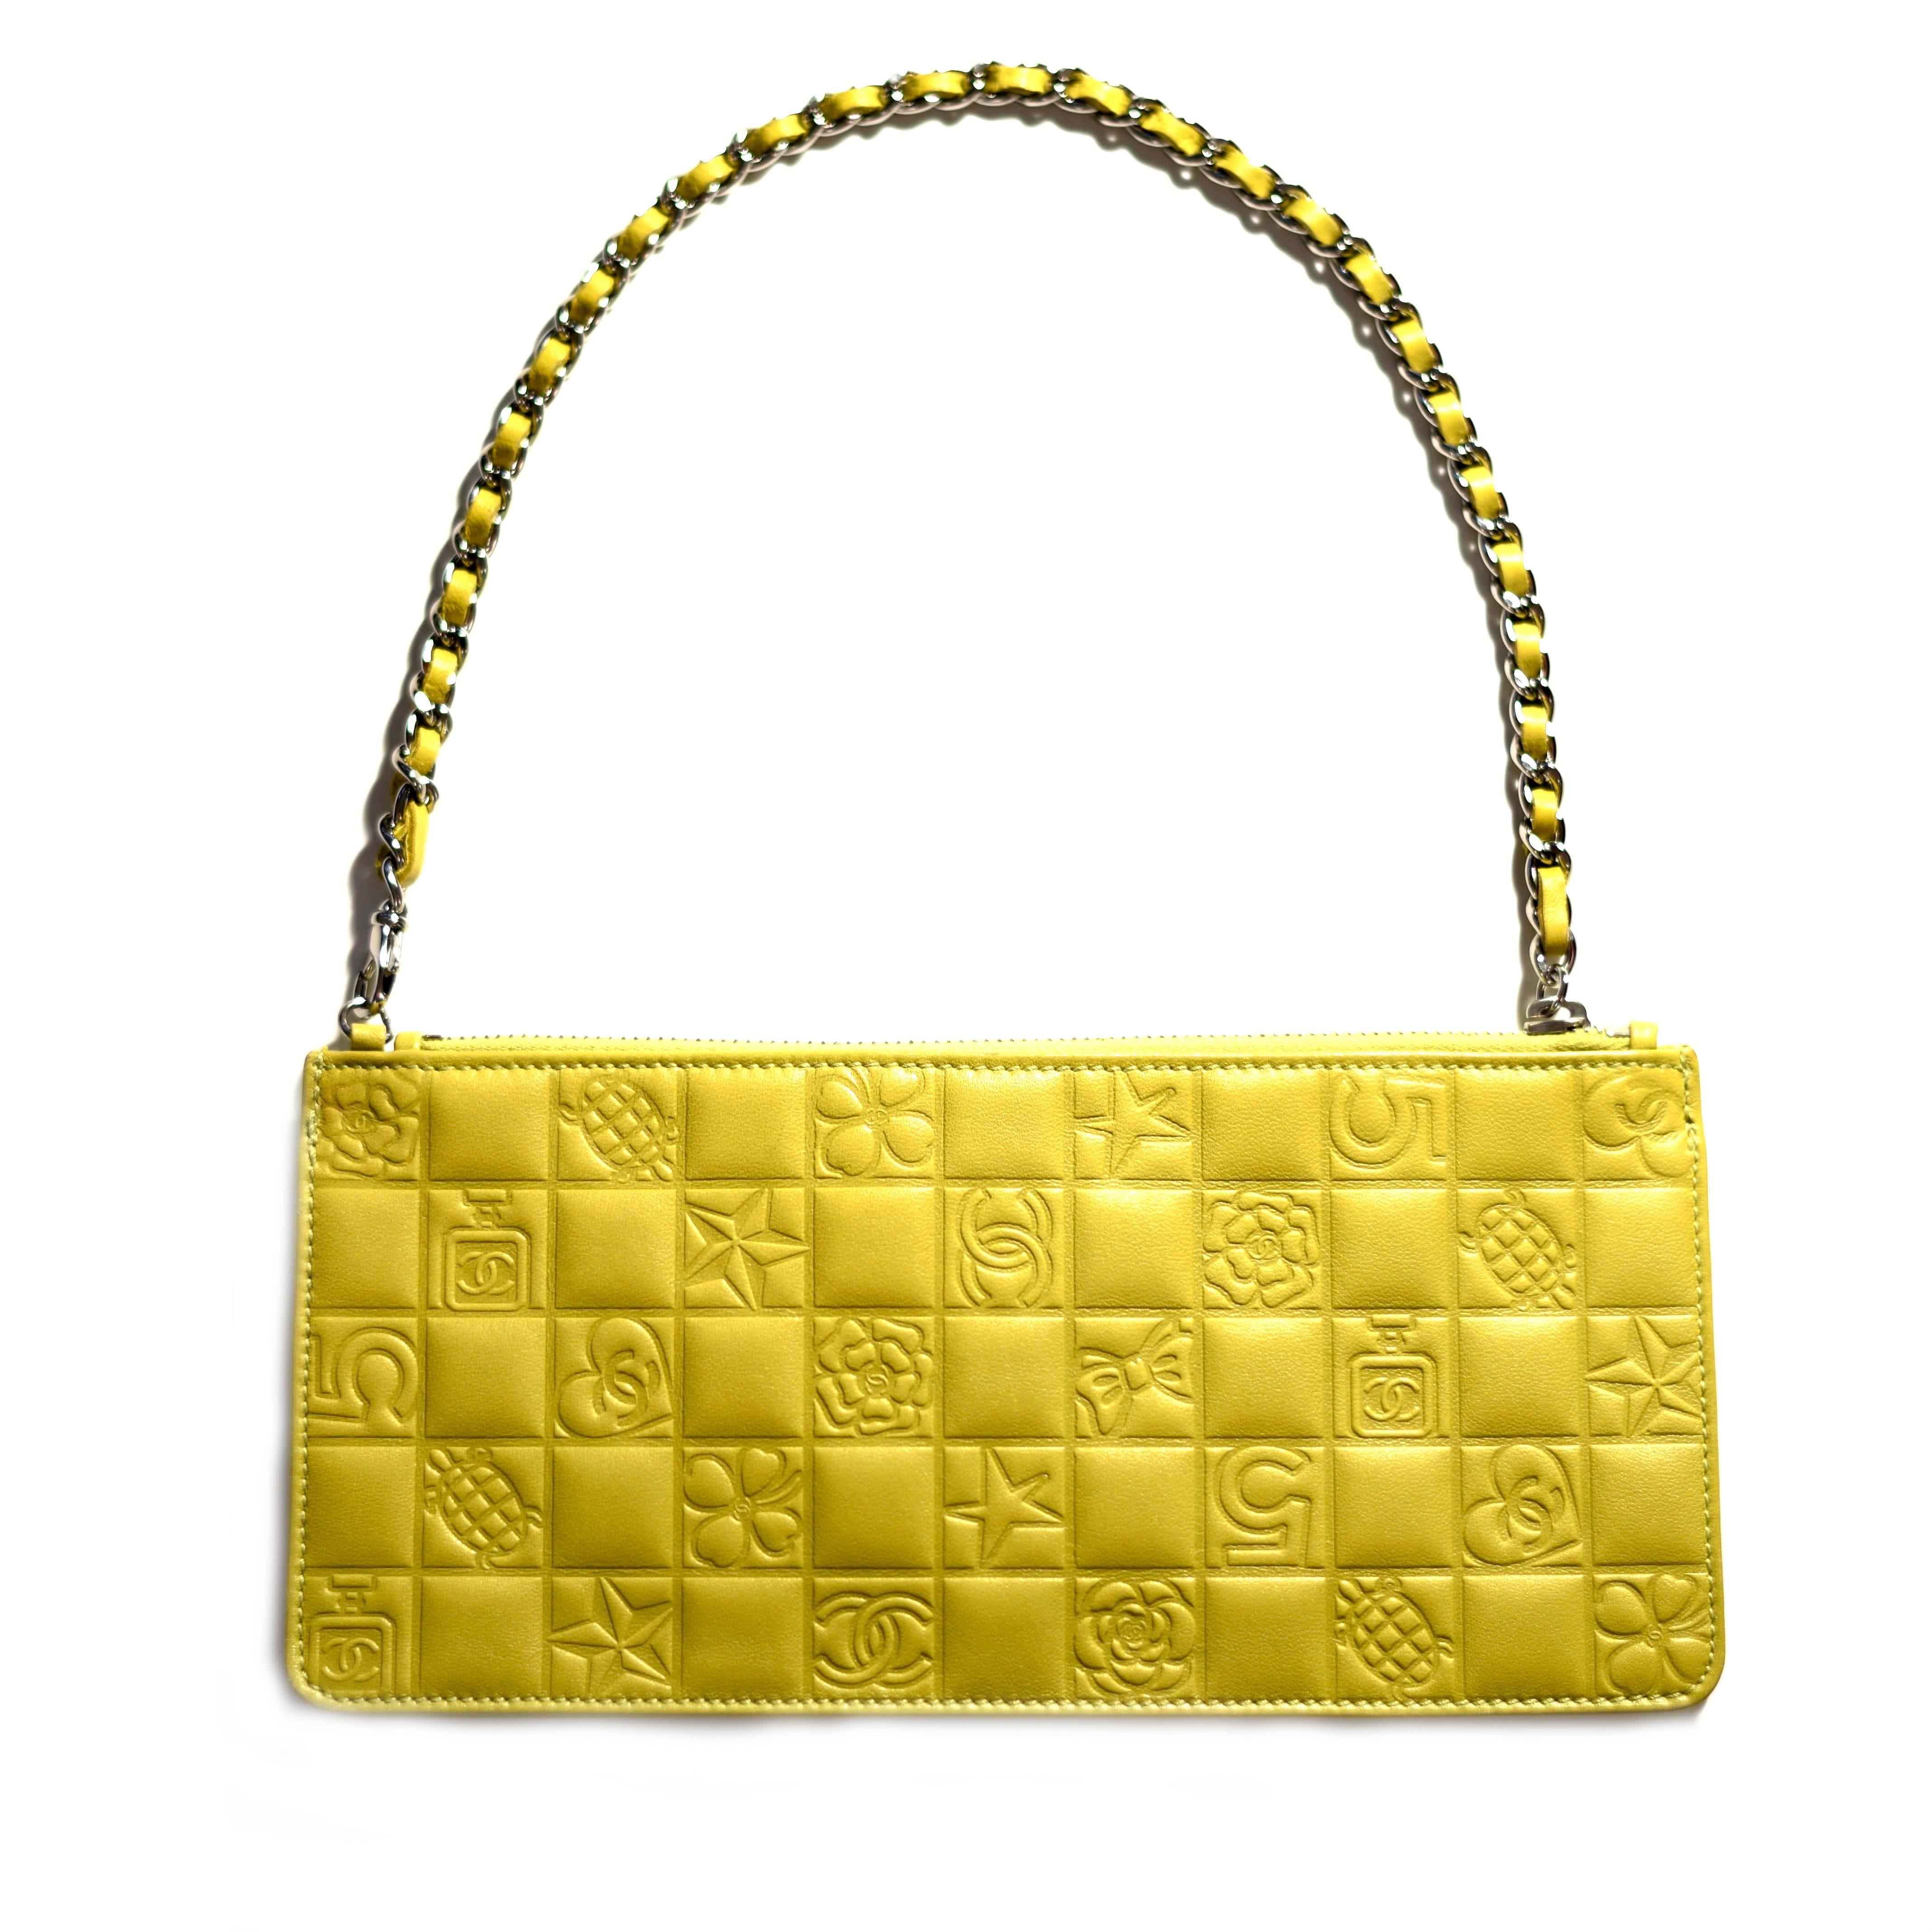 Chanel - Lucky Charms Clutch Bag

Color: Yellow

Material: Leather

------------------------------------------------------------

Details:

- silver tone hardware

- woven chain strap

- cc logo at front

- lucky charms symbols